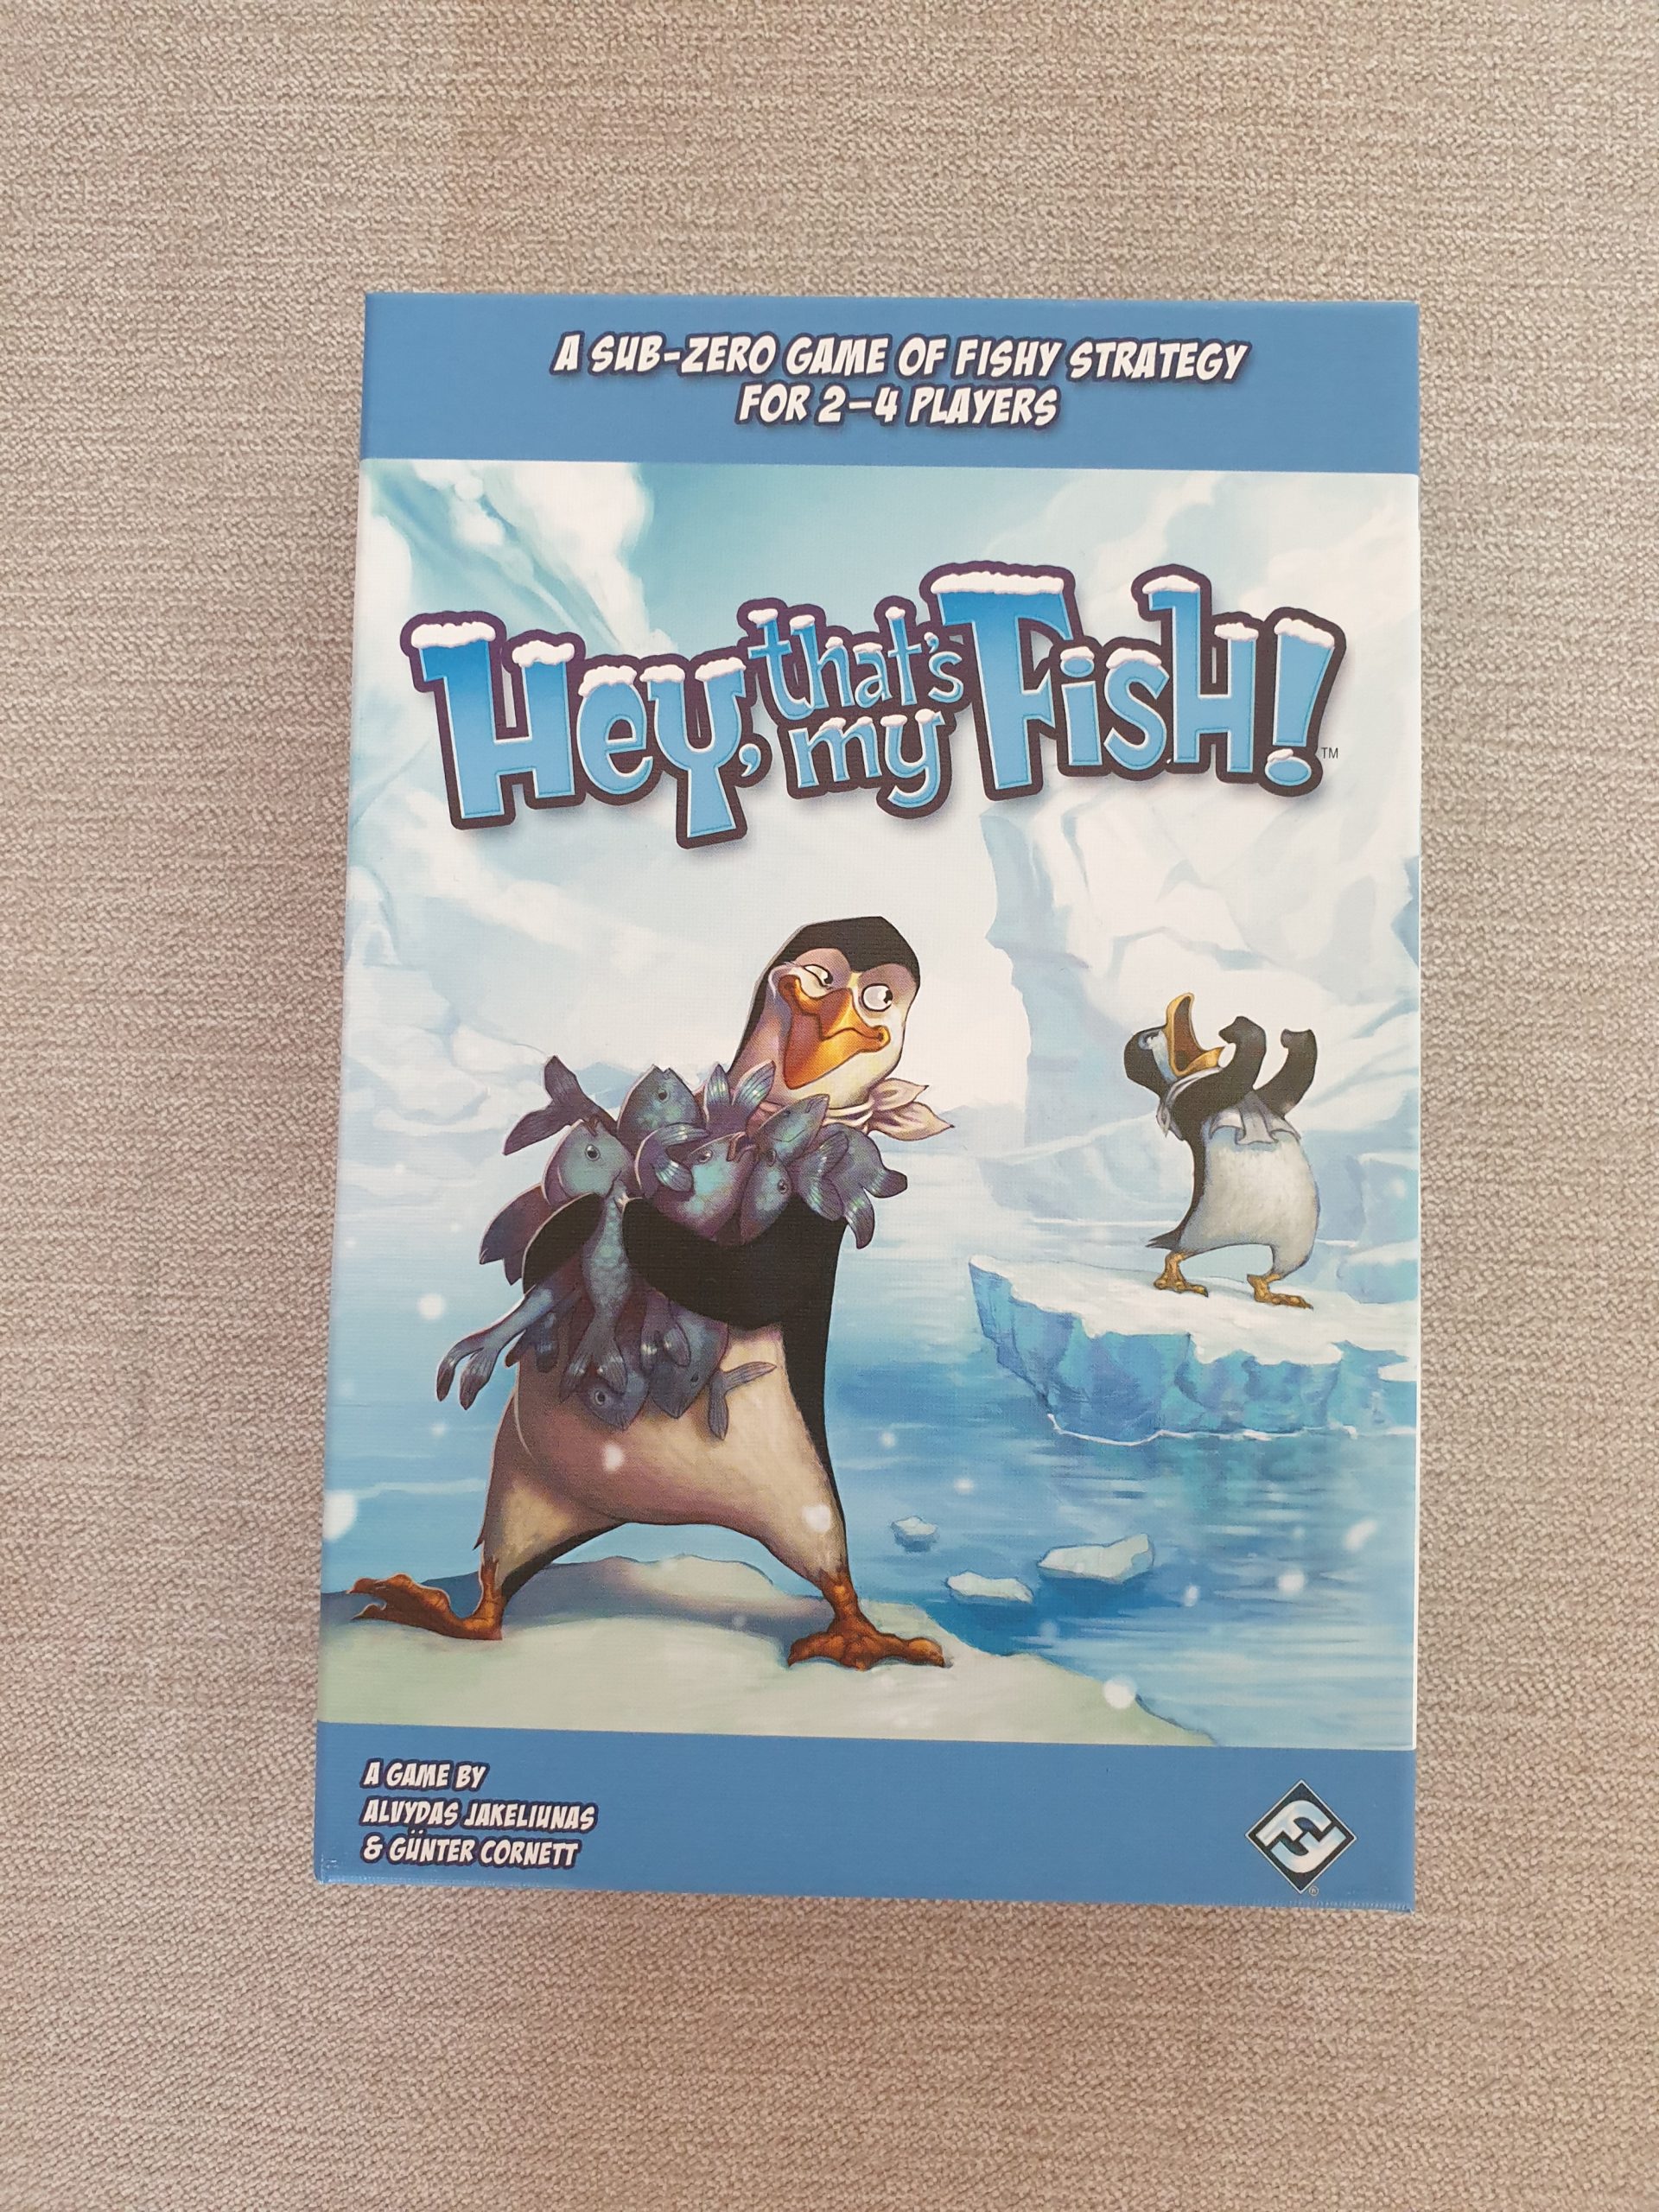 photograph of a rulebook for the game Hey! That's my fish. The cover shows a cartoon penguin standing on a an ice-floe, clutching some fish, while another penguin is raging in the background